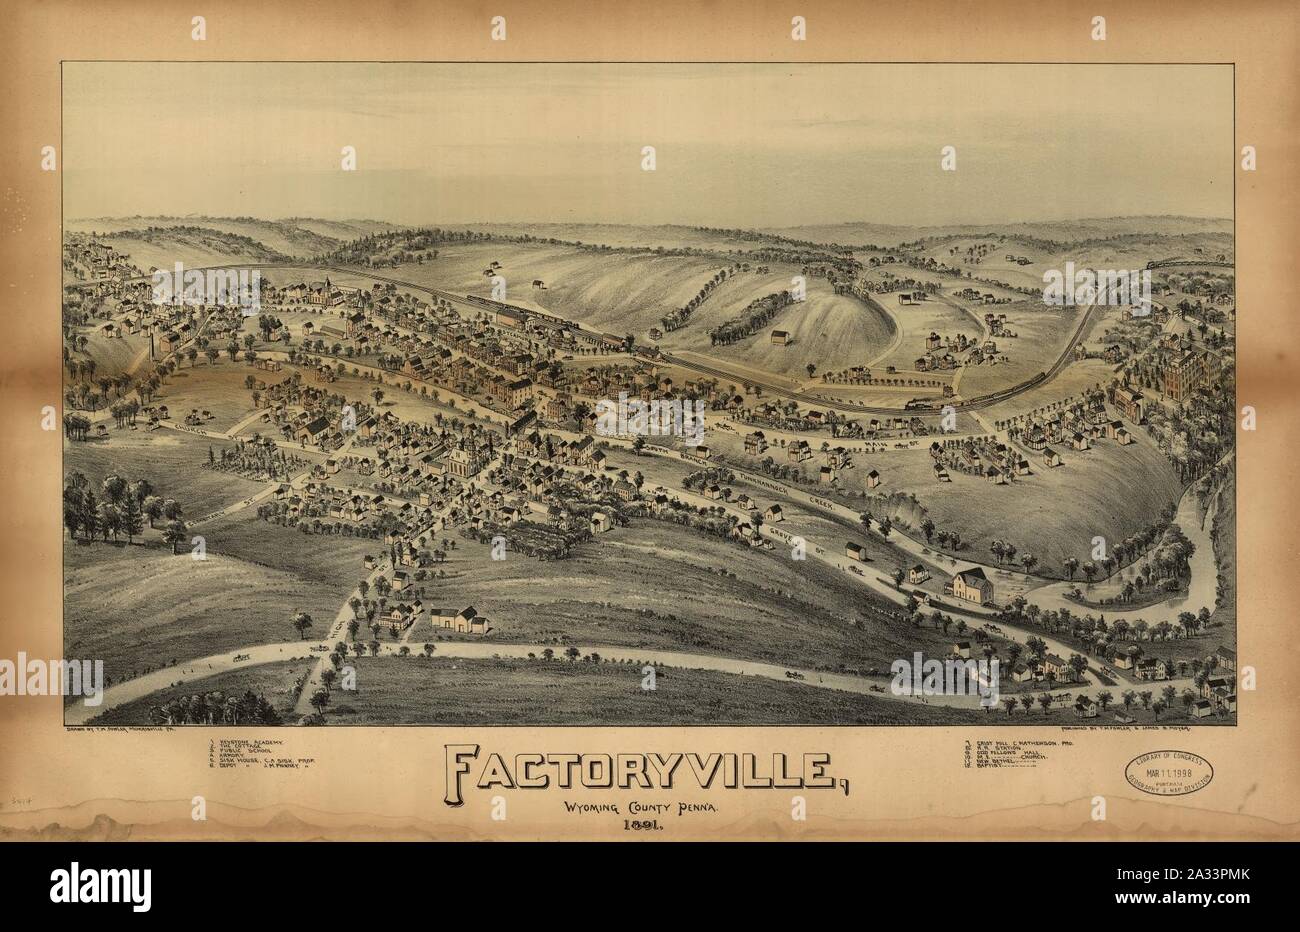 Factoryville, Wyoming County, Penn'a Stock Photo